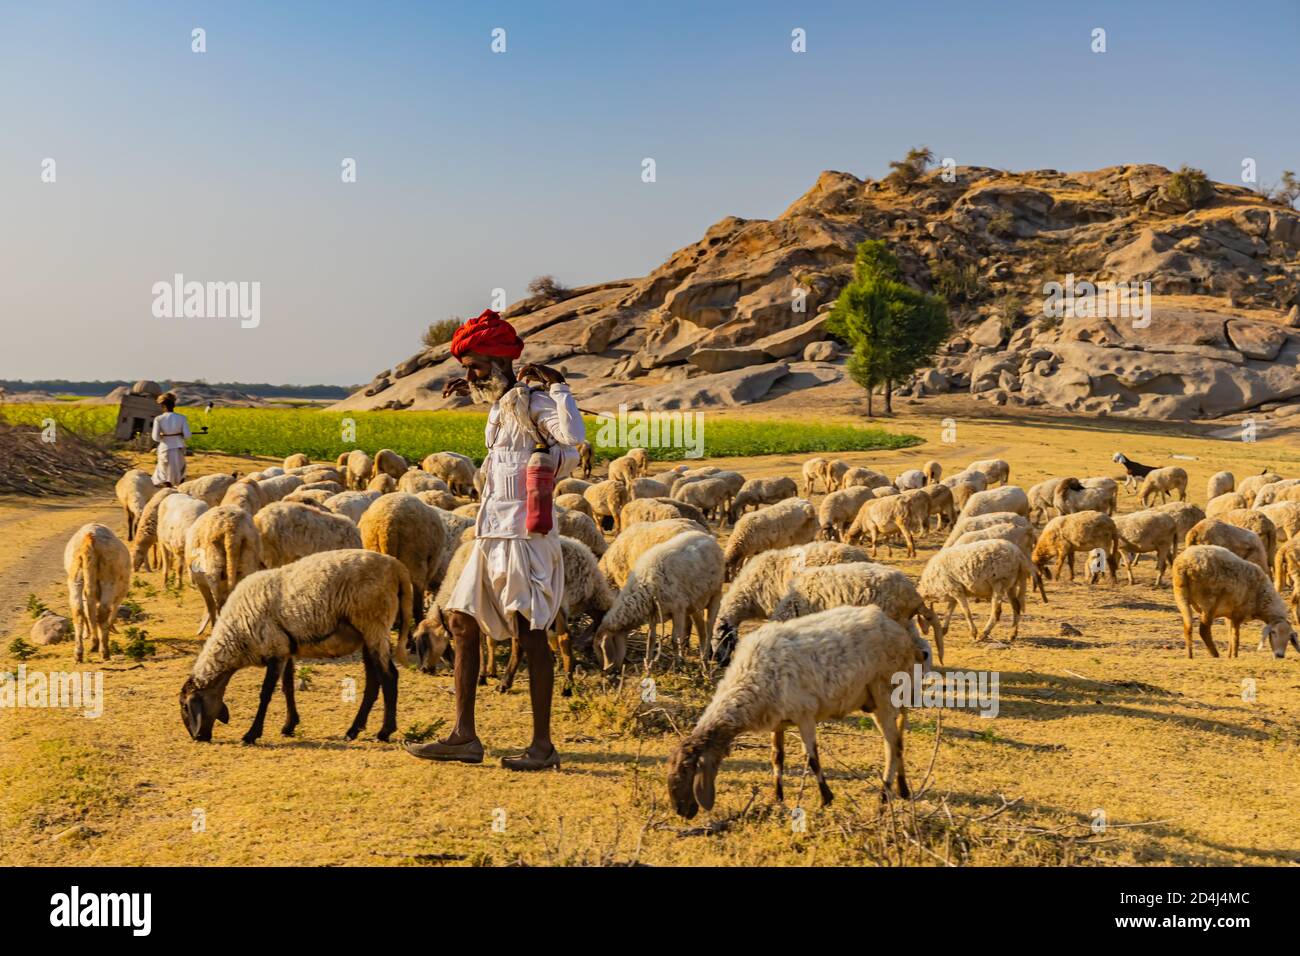 Image of a Shepard walking with his cattle grazing in the grasslands at Jawai in rajasthan India under the last rays of sun on 23 November 2018 Stock Photo